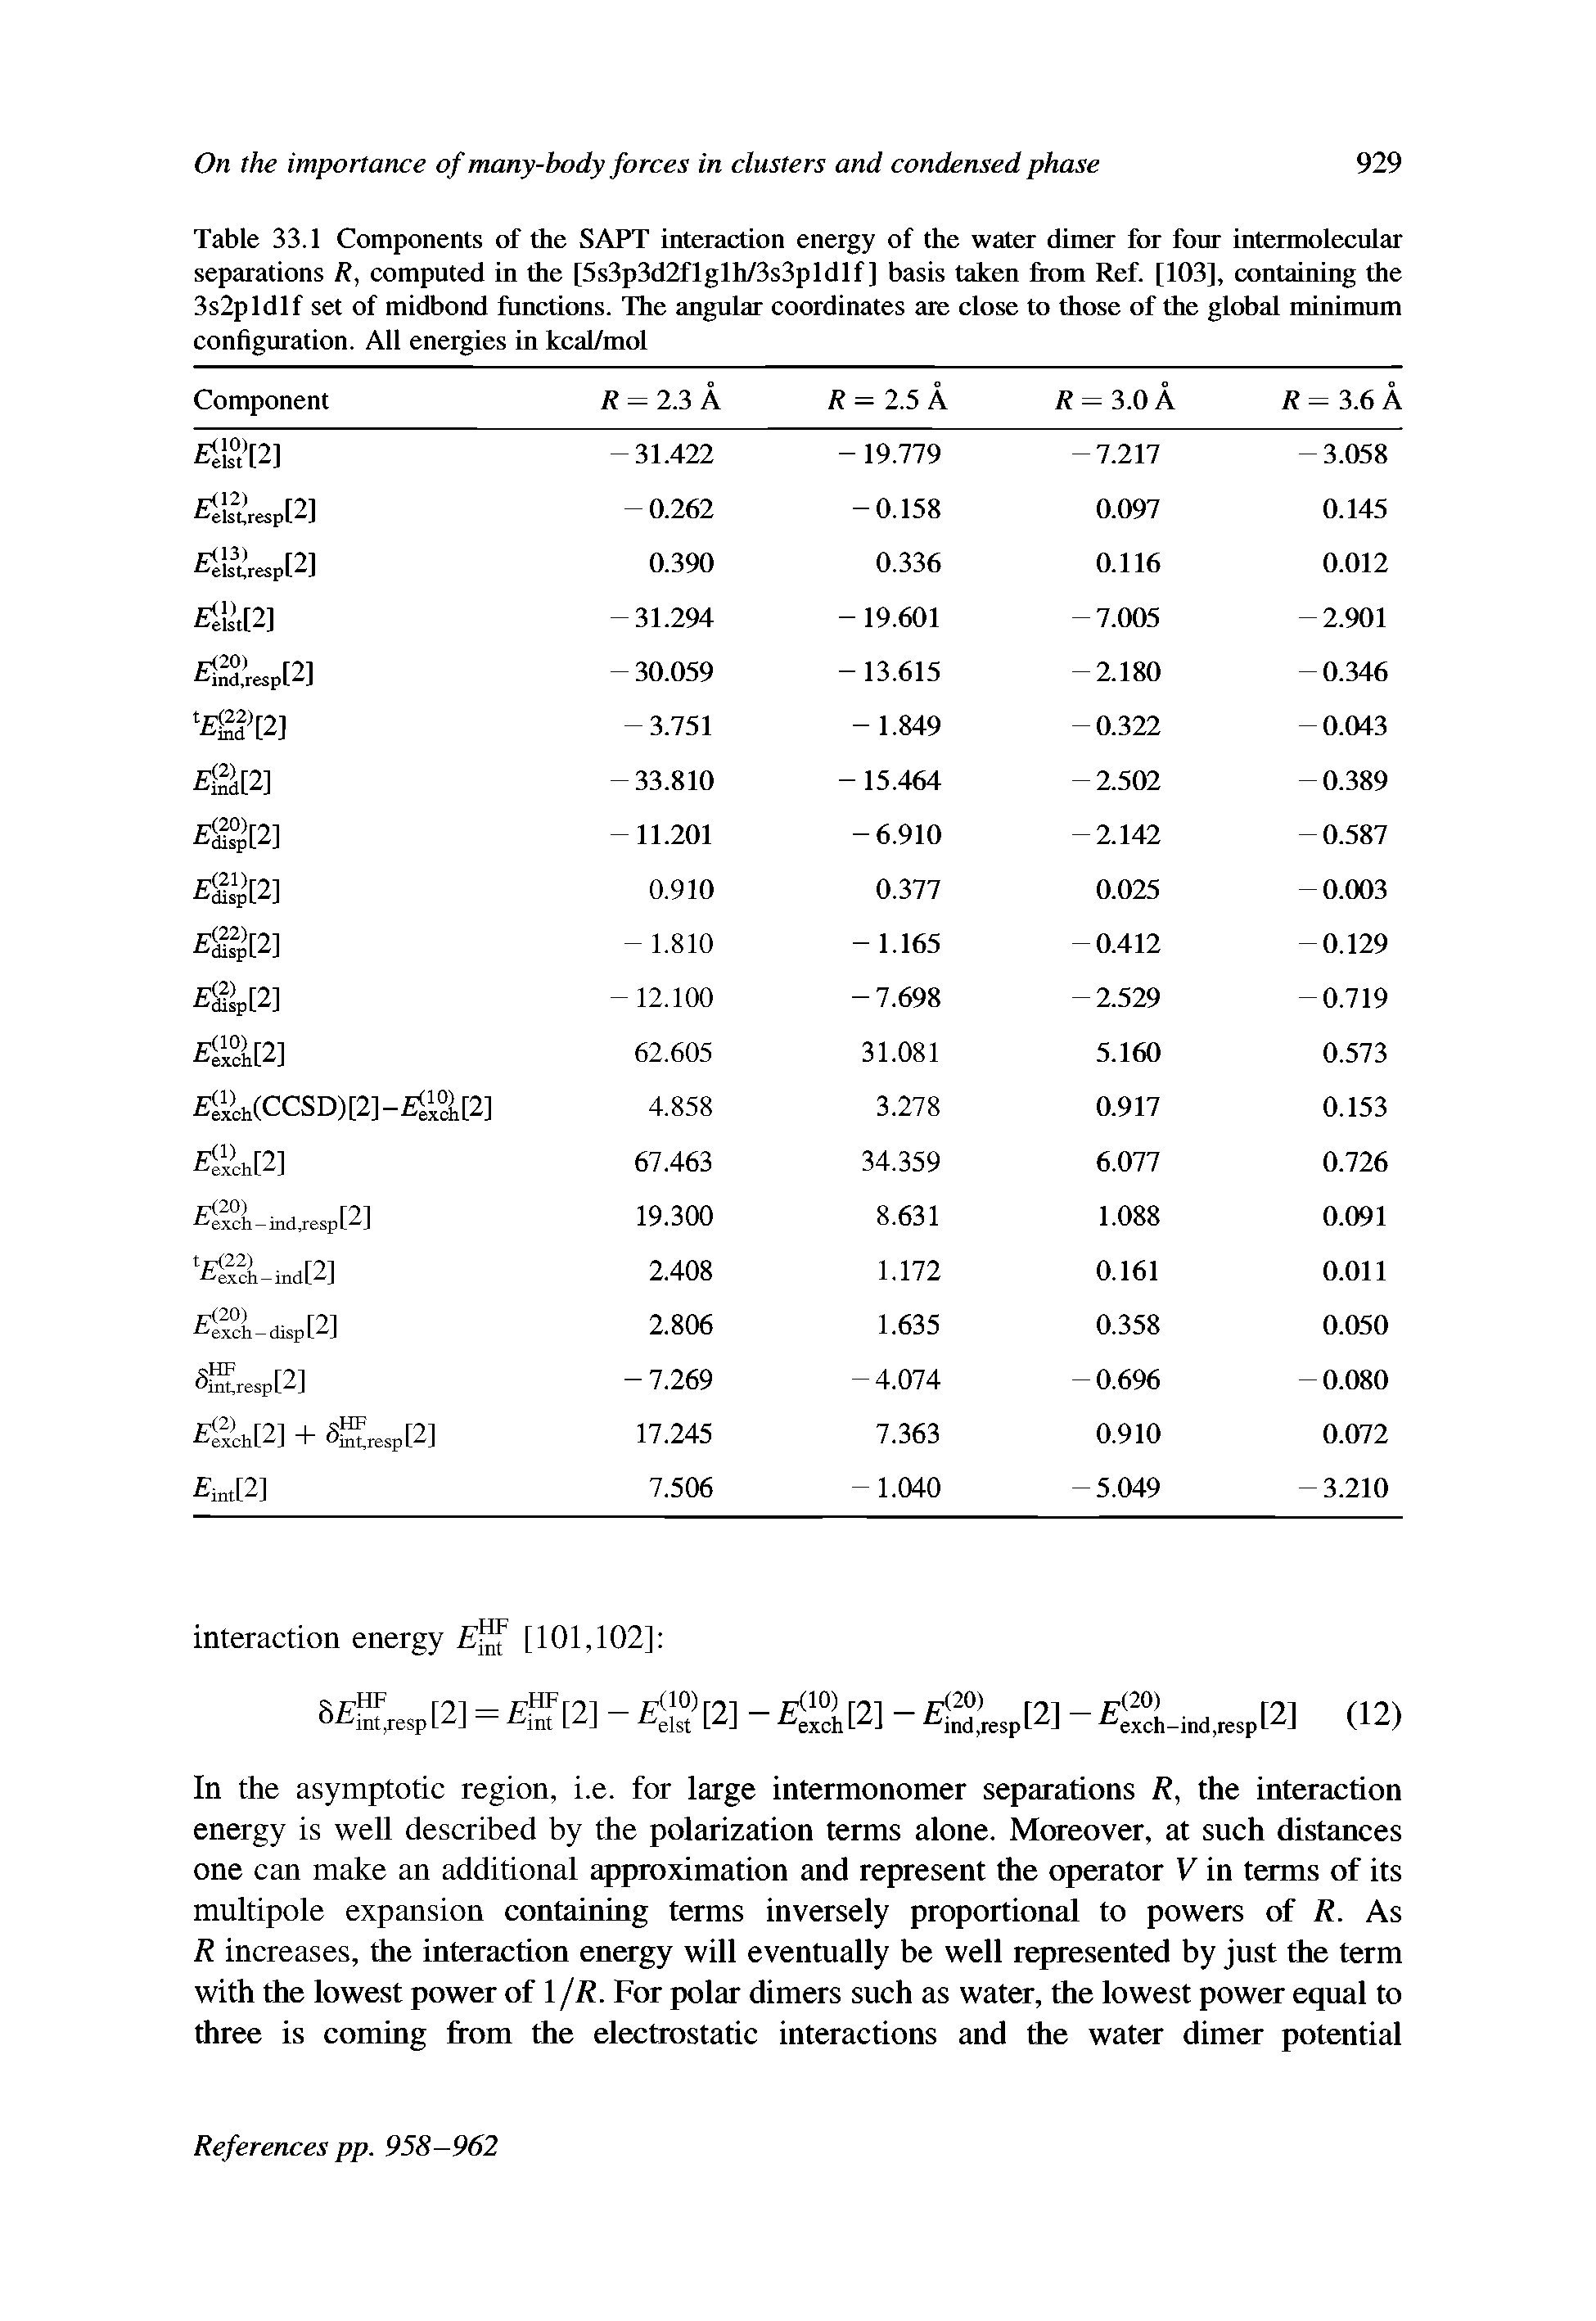 Table 33.1 Components of the SAPT interaction energy of the water dimer for four intermolecular separations R, computed in the [5s3p3d2flglh/3s3pldlf ] basis taken from Ref. [103], containing the 3s2pldlf set of midbond functions. The angular coordinates are close to those of the global minimum configuration. All energies in kcal/mol...